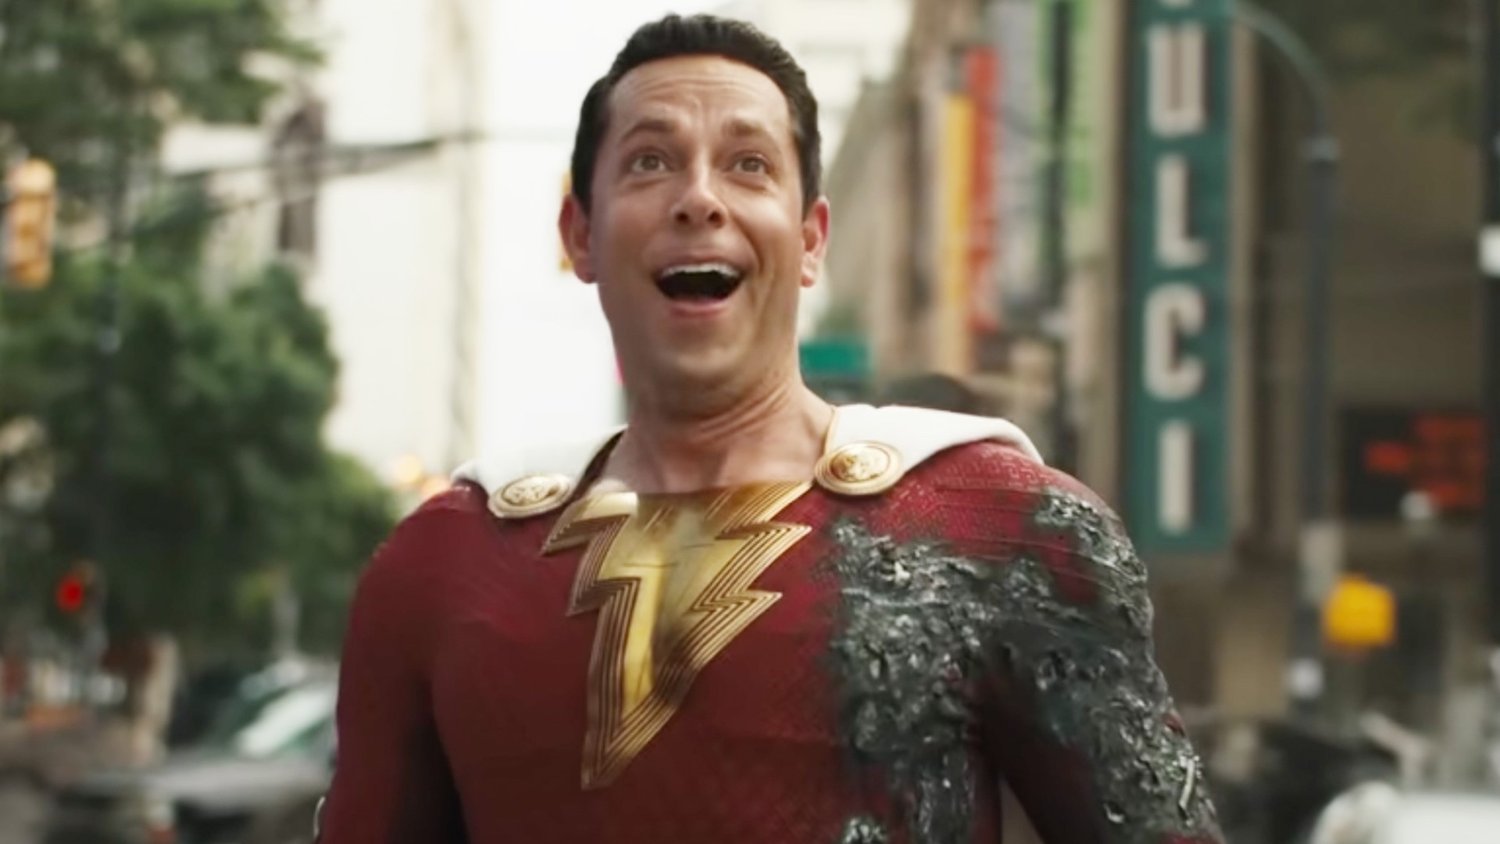 zachary levi adresses zack snyder fans wanting shazam sequel to fail and says marketing was the biggest issue